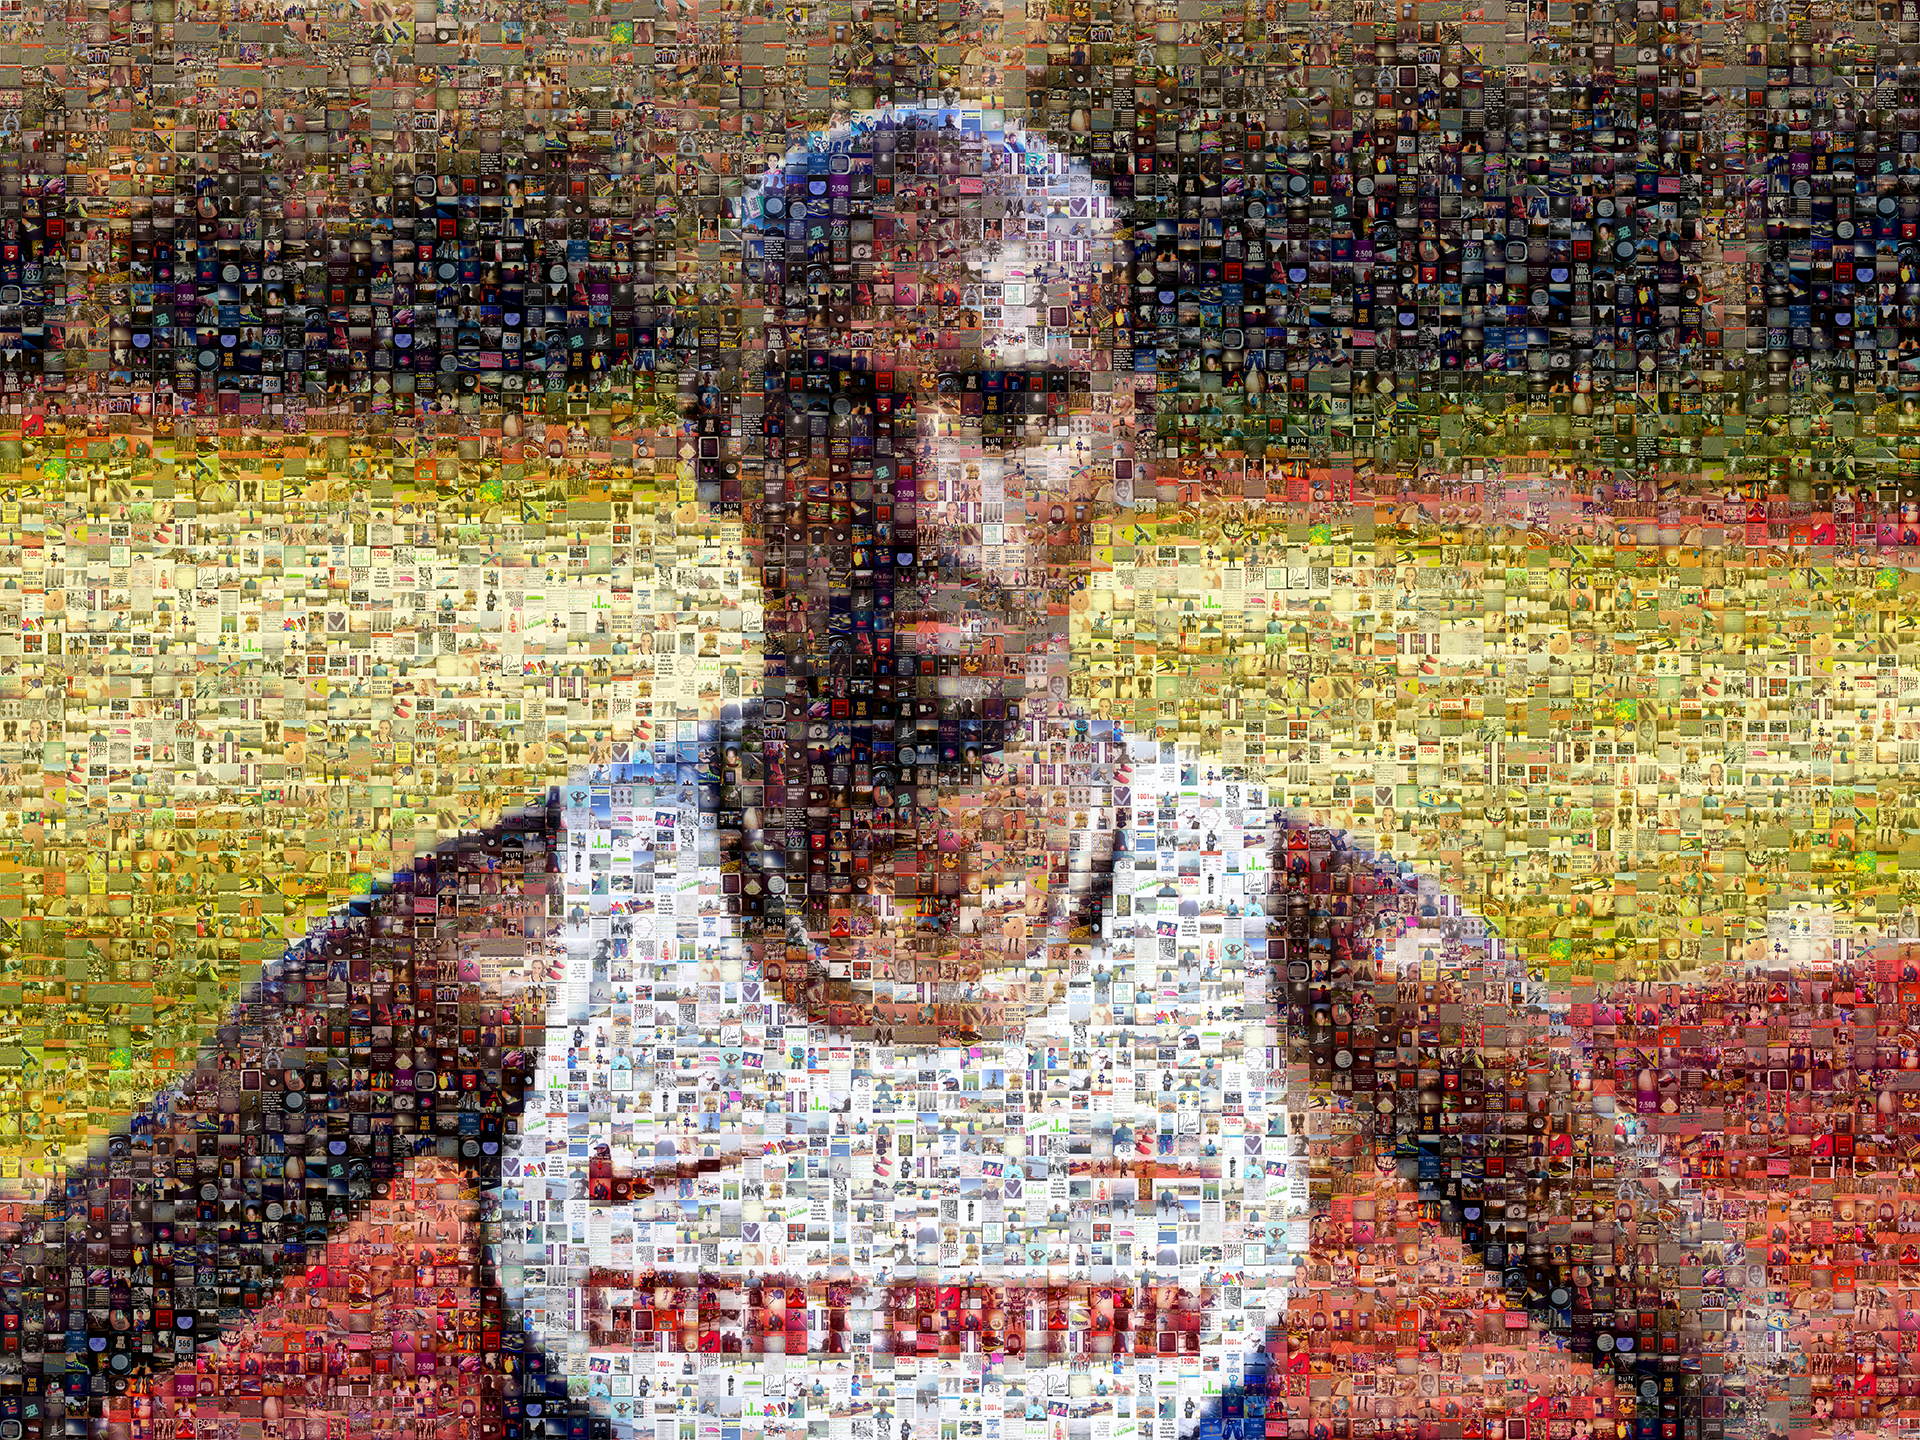 photo mosaic created using fan submitted running photos